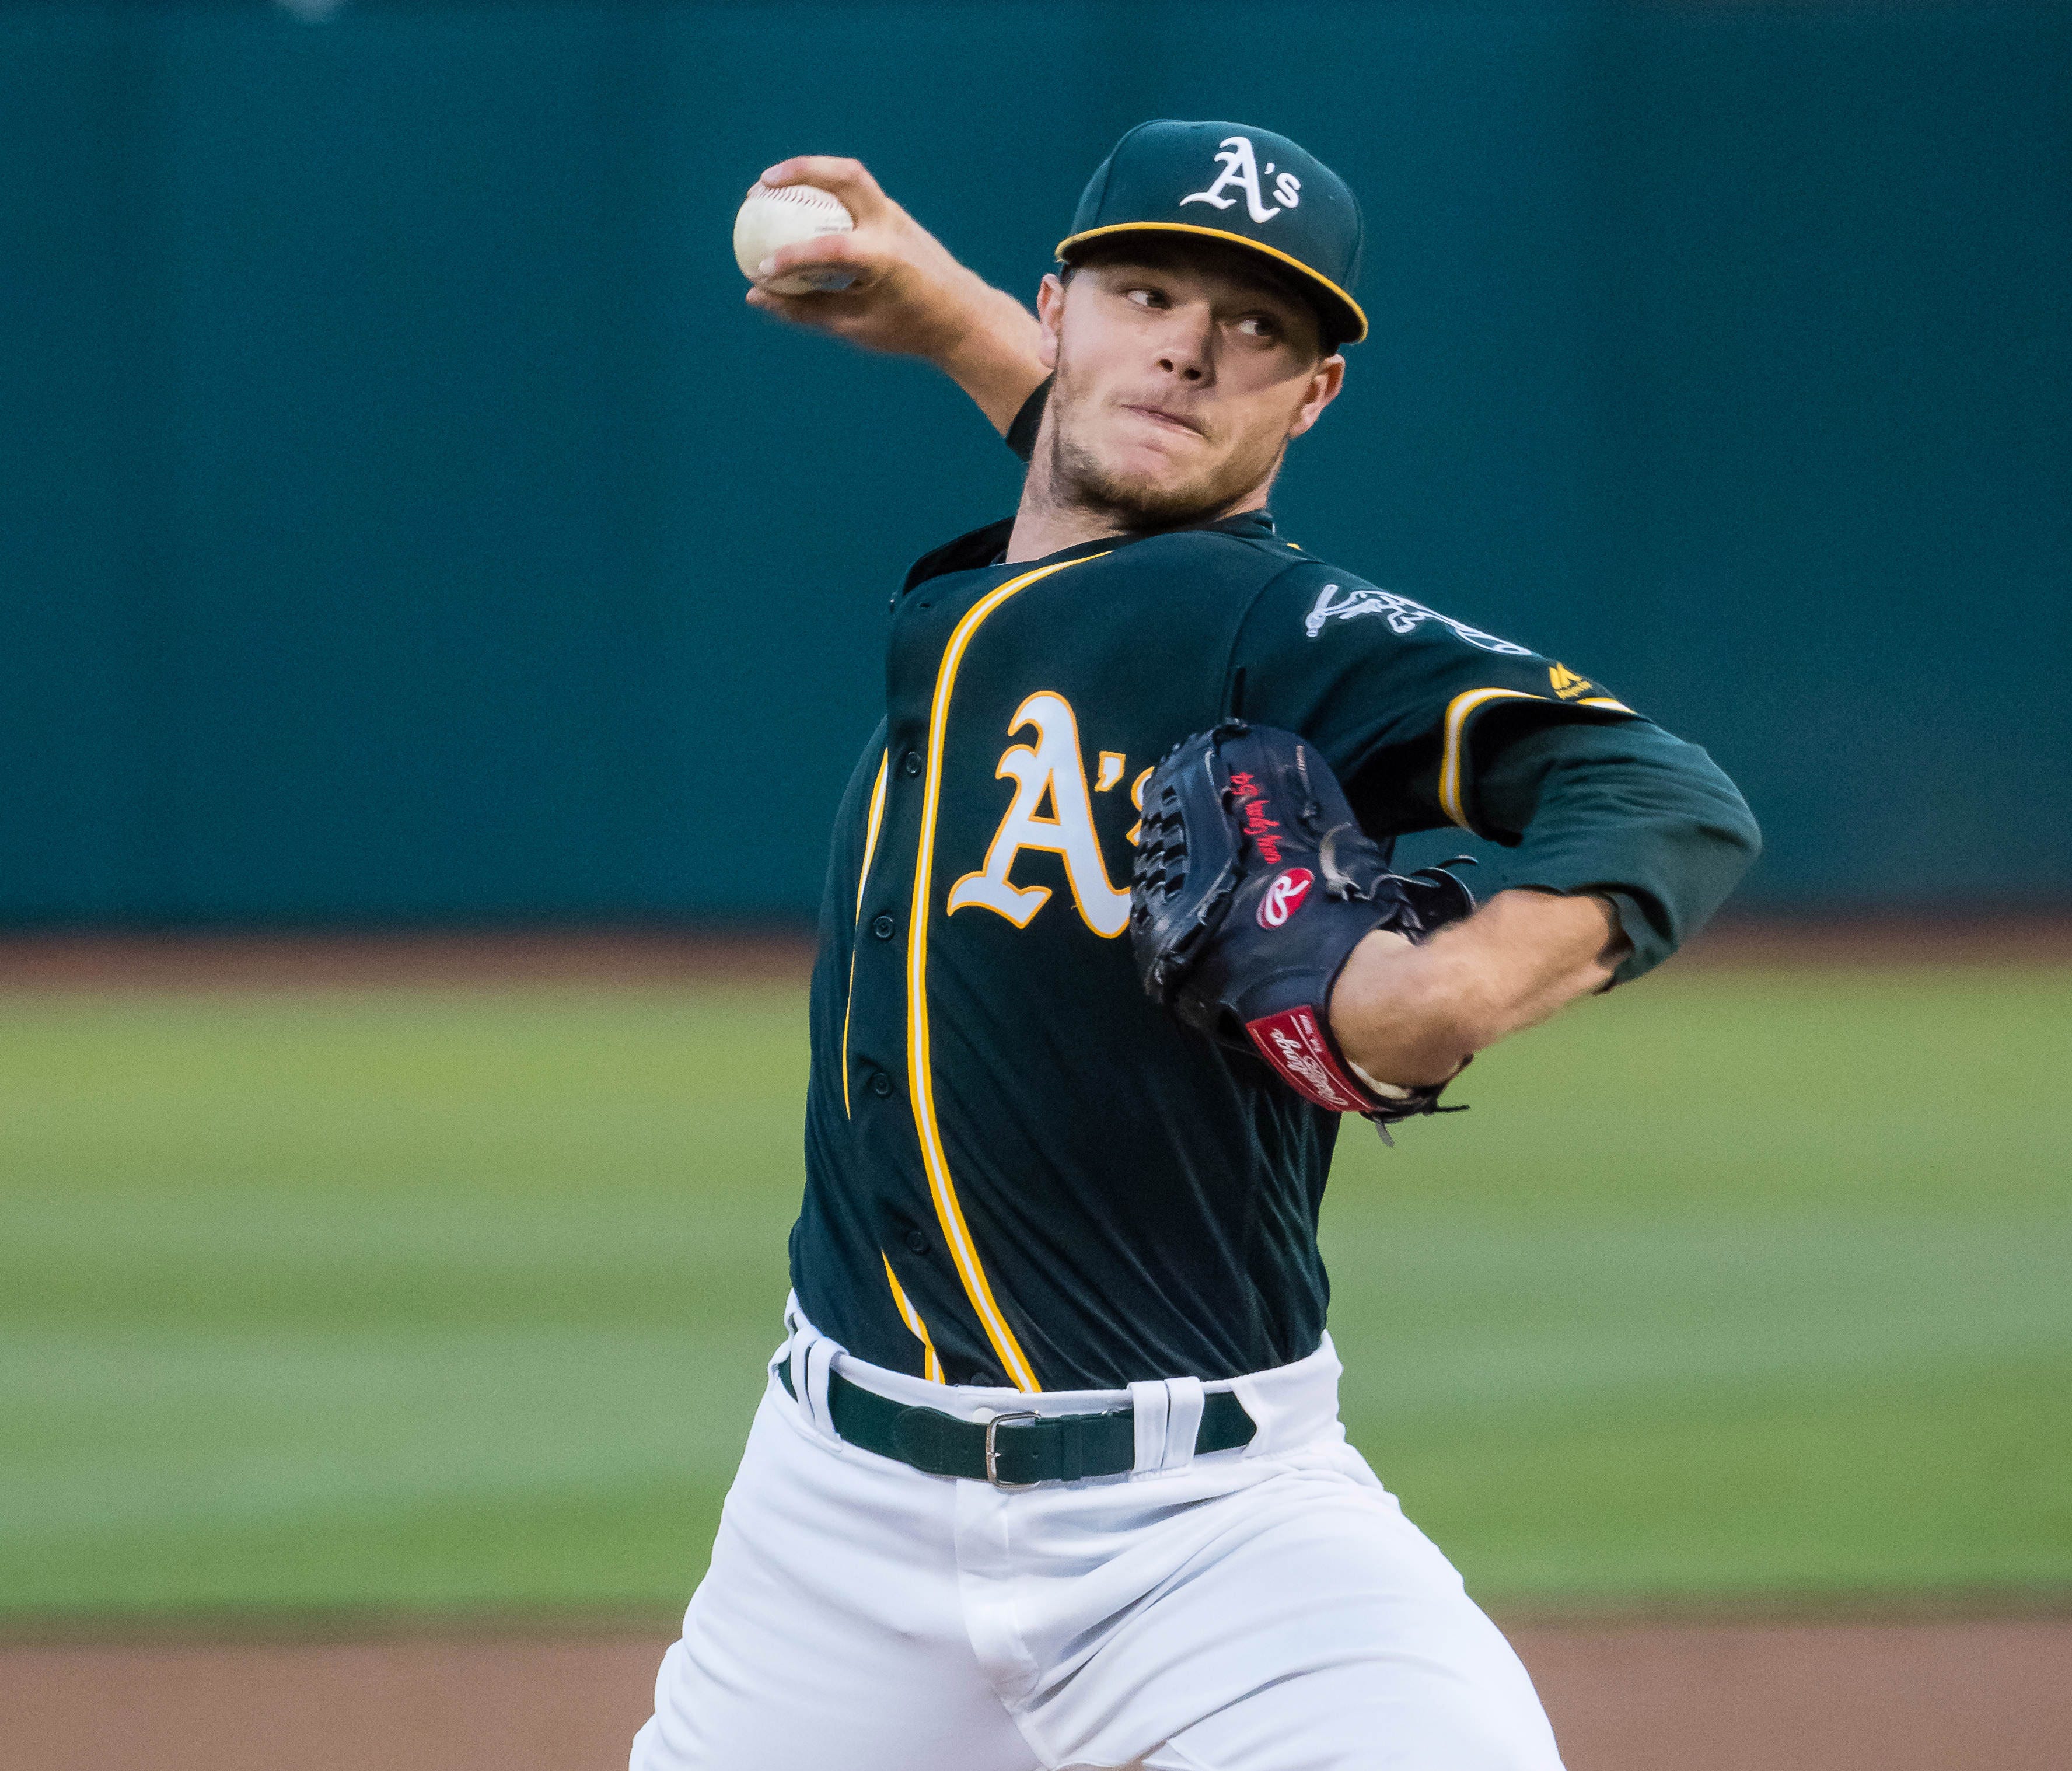 Sonny Gray is 6-5 with a 3.43 ERA this season.